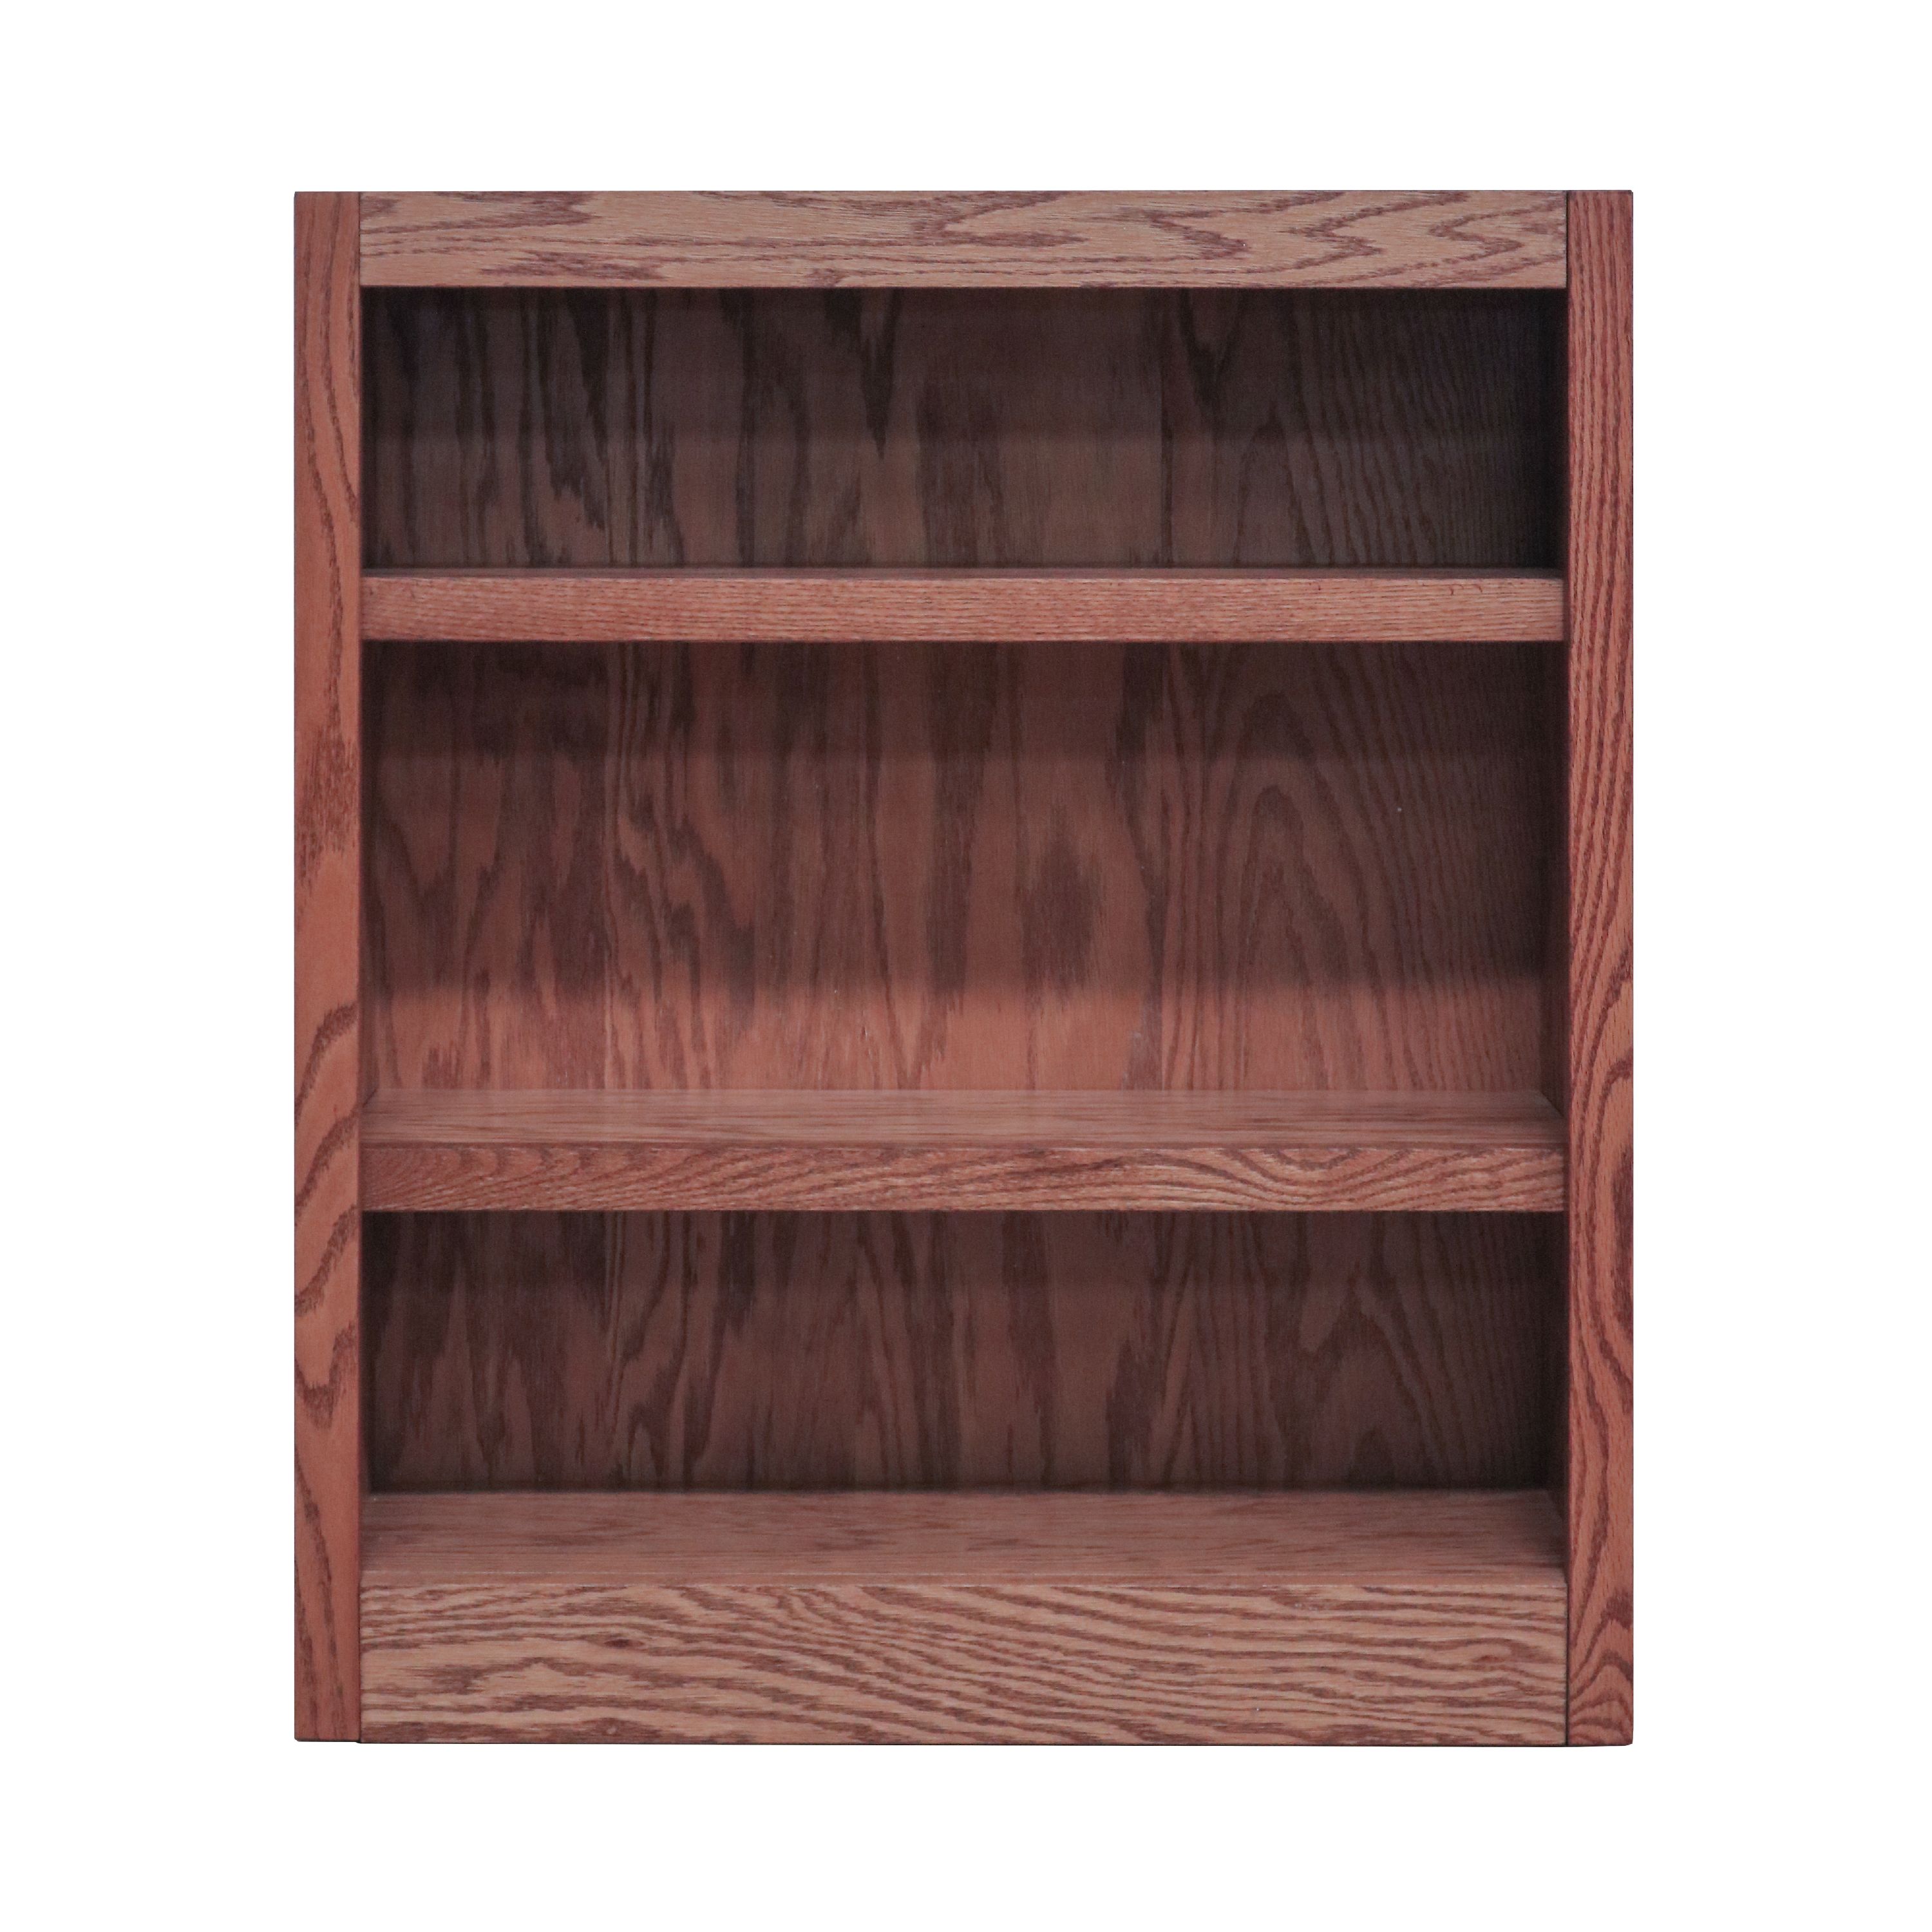 Concepts in Wood 3 Shelf Wood Bookcase, 36 inch Tall - Oak Finish - image 2 of 6